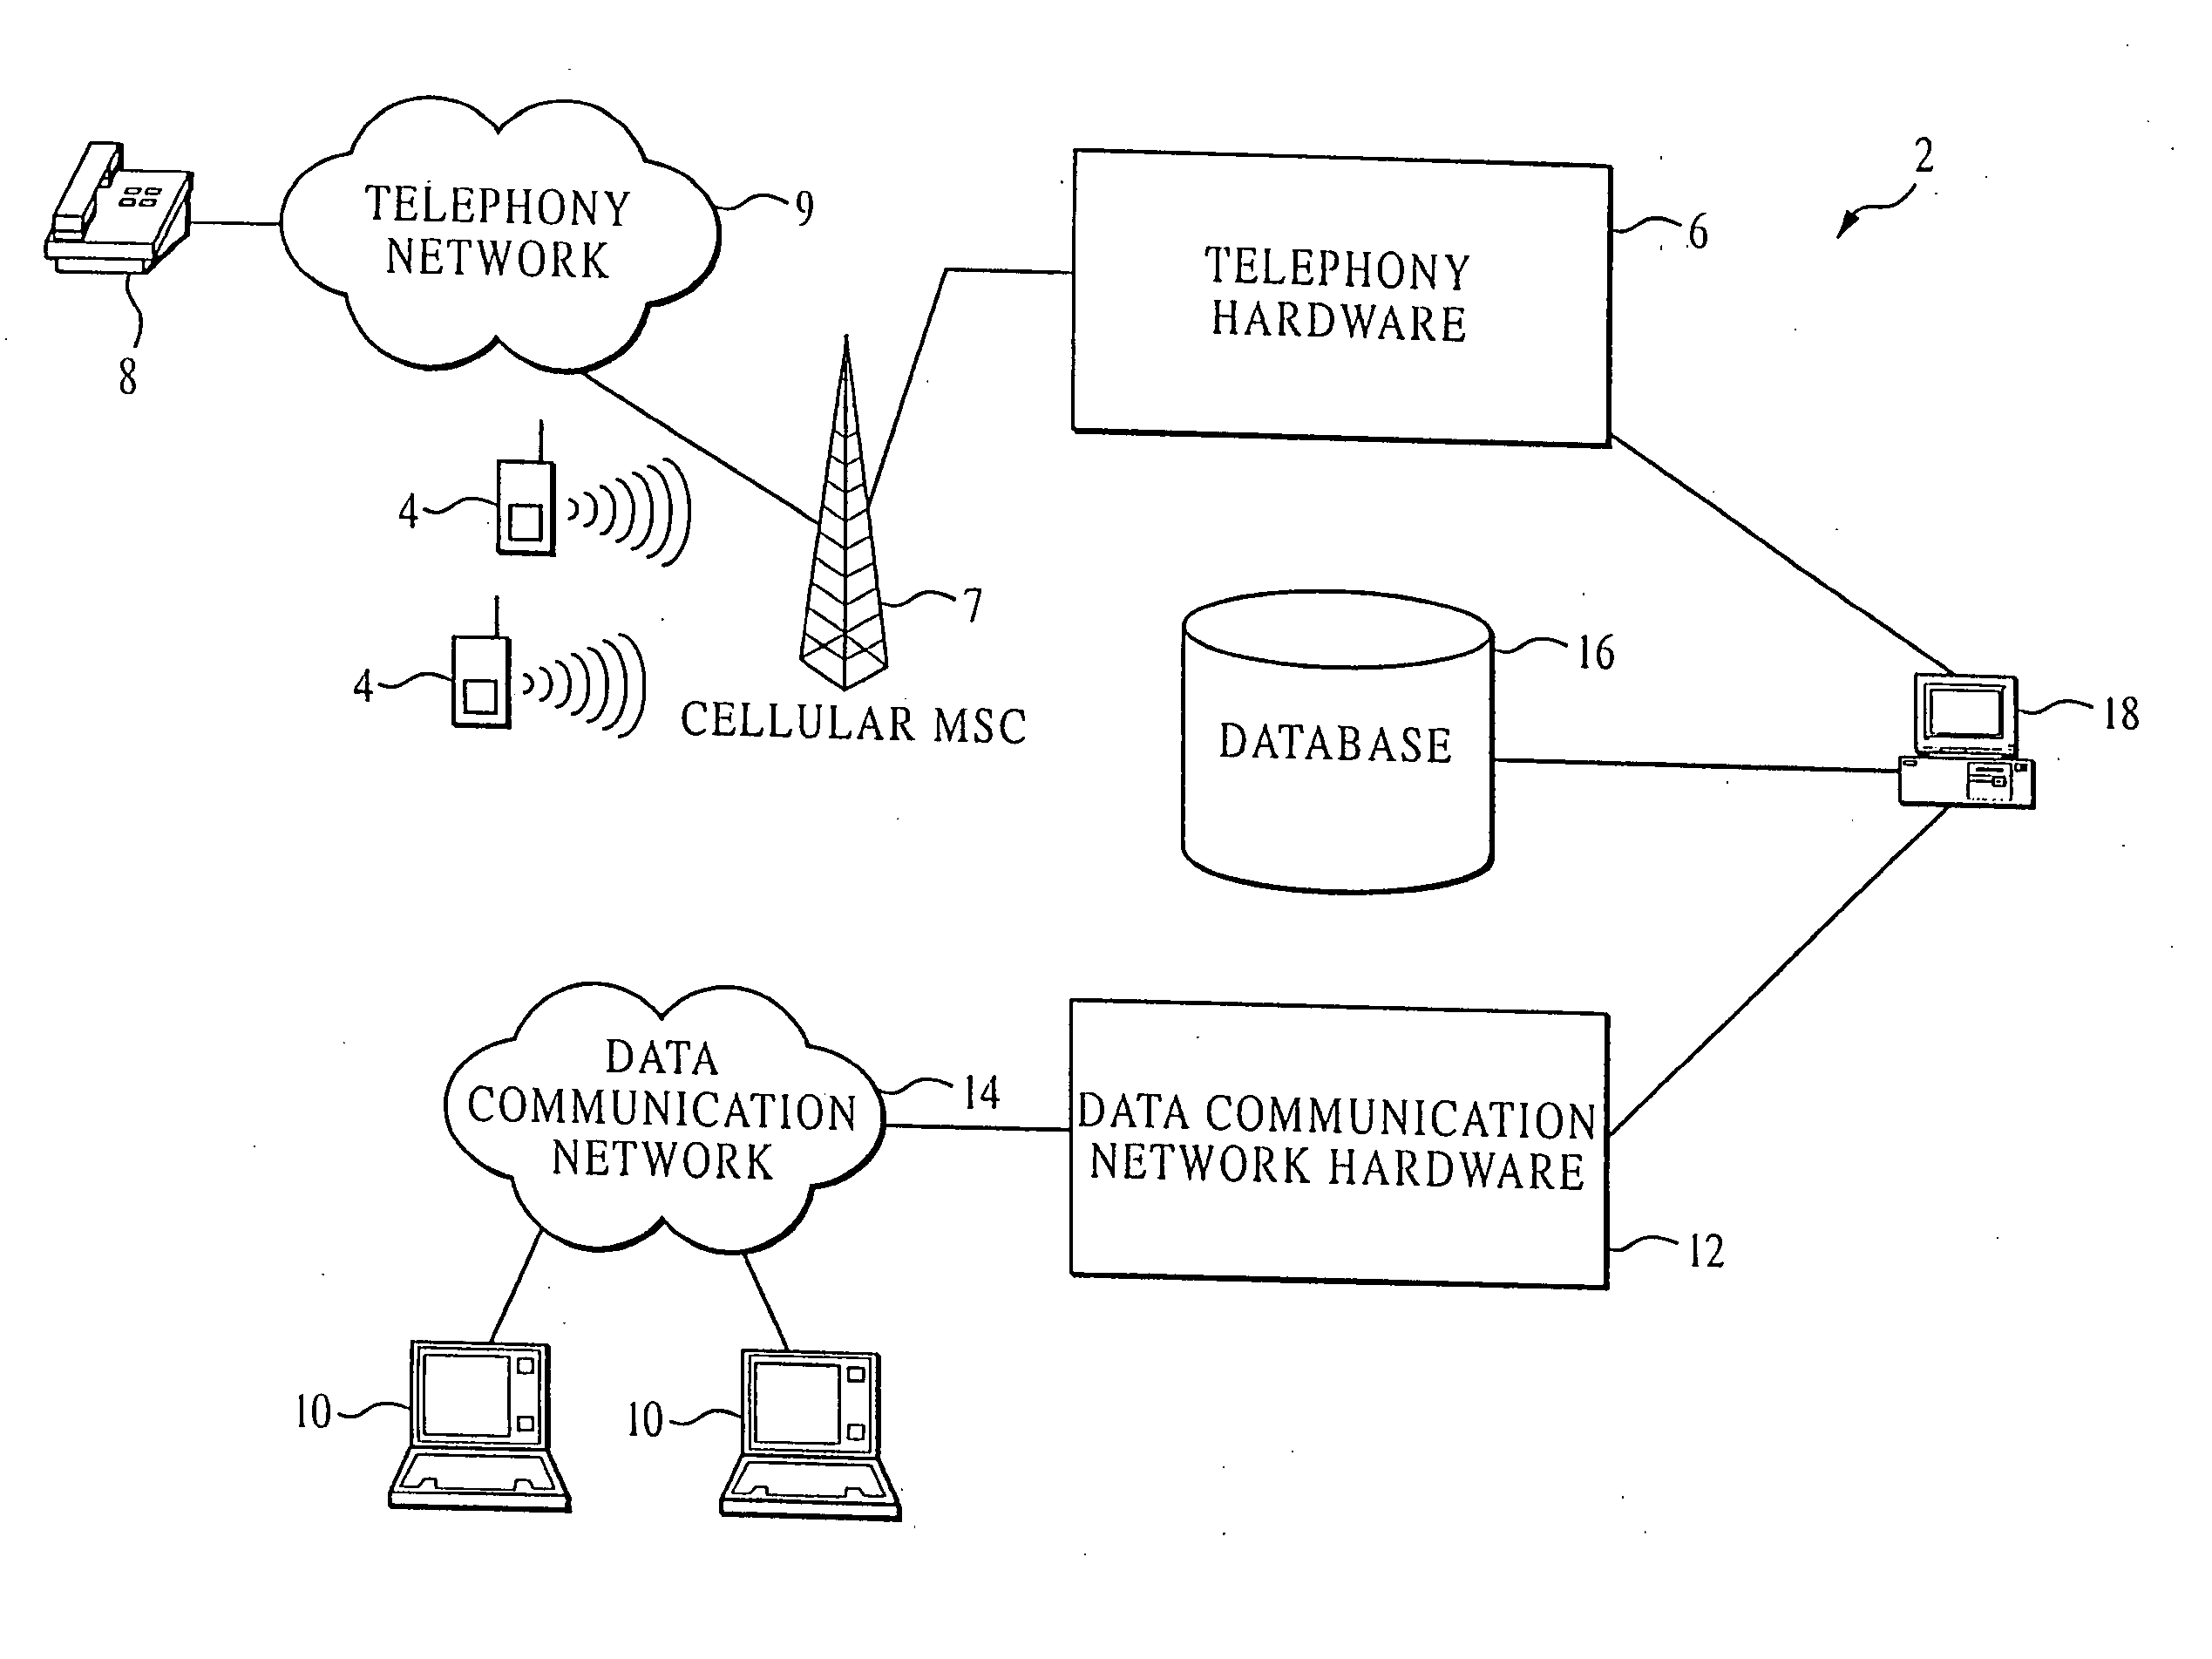 Personalized assistance system and method